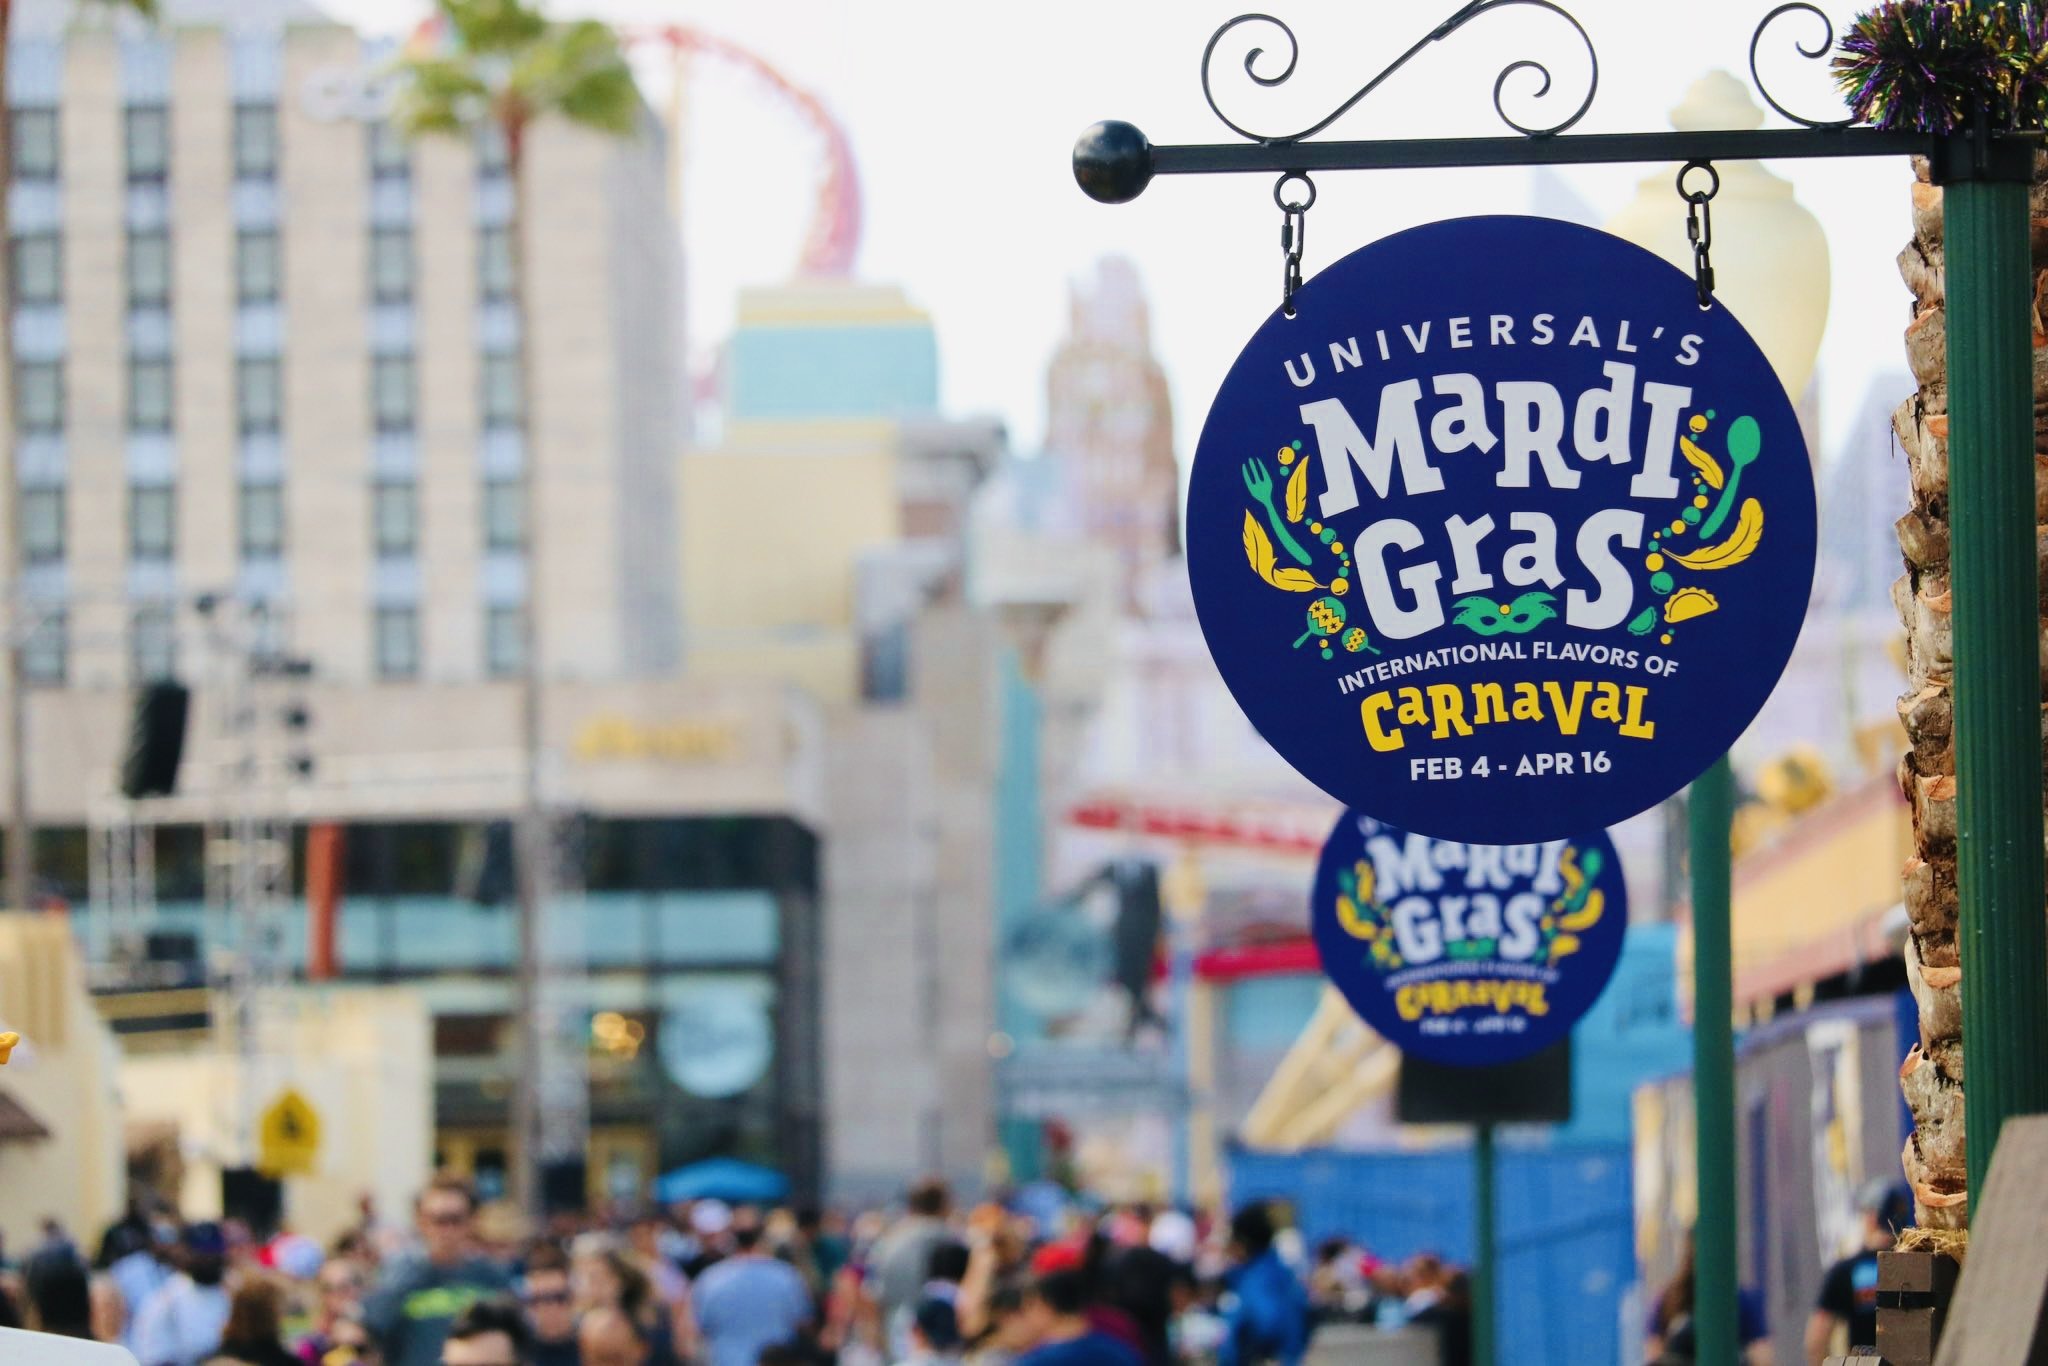 PHOTO REPORT: Universal Orlando Resort 3/23/21 (Gargoyles Added to the  Entrance of the Legacy Store, More Characters in Mardi Gras Outfits,  Crowds, A Visit to Rising Star, and More) - WDW News Today